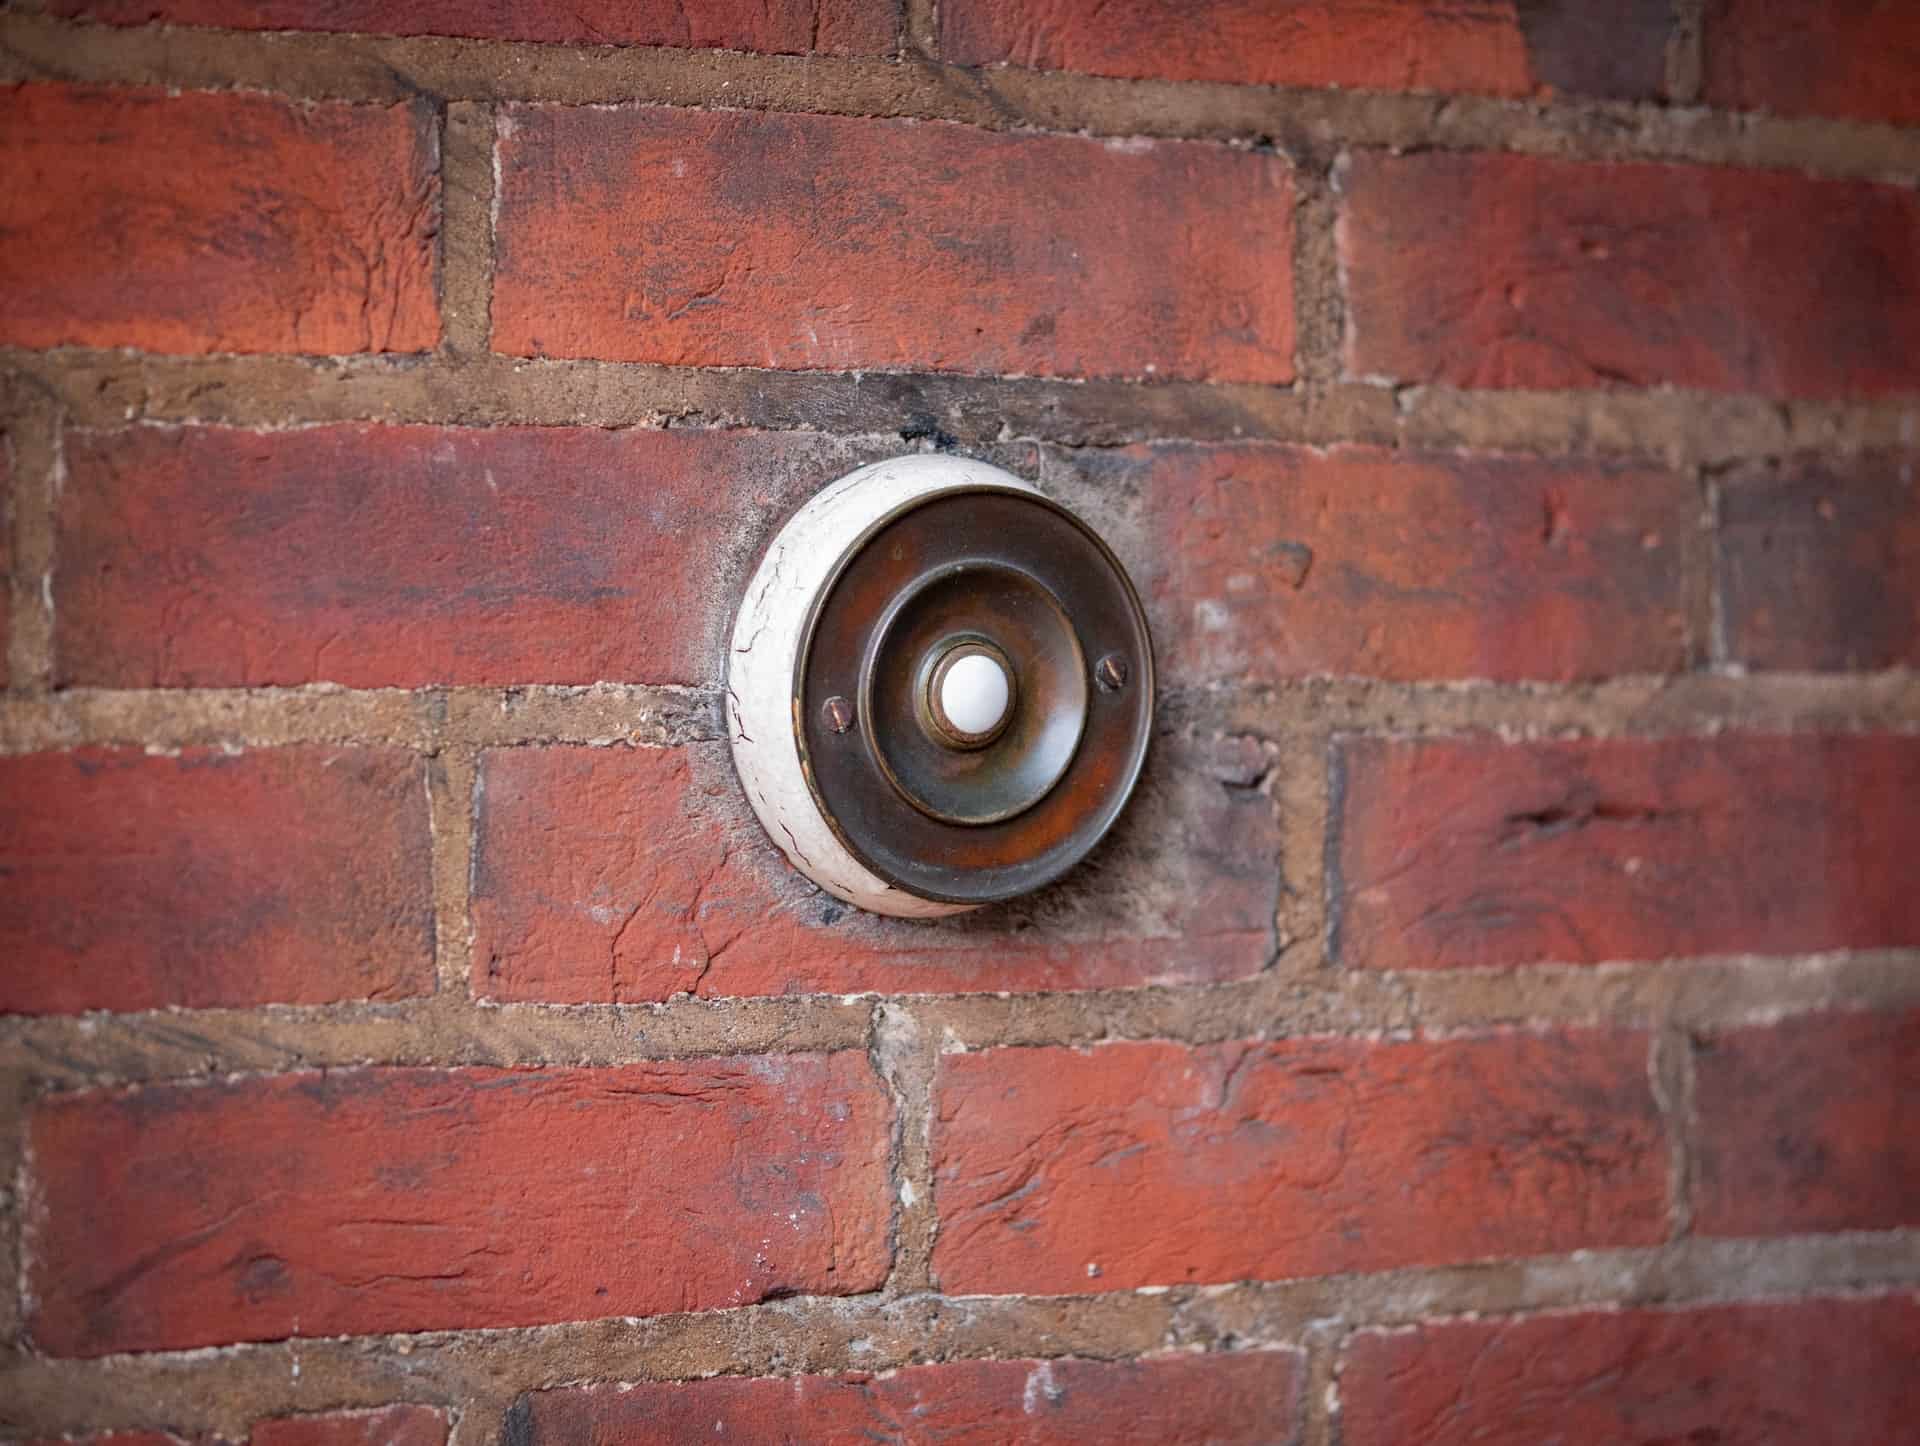 Wireless doorbell. What is worth knowing before buying?